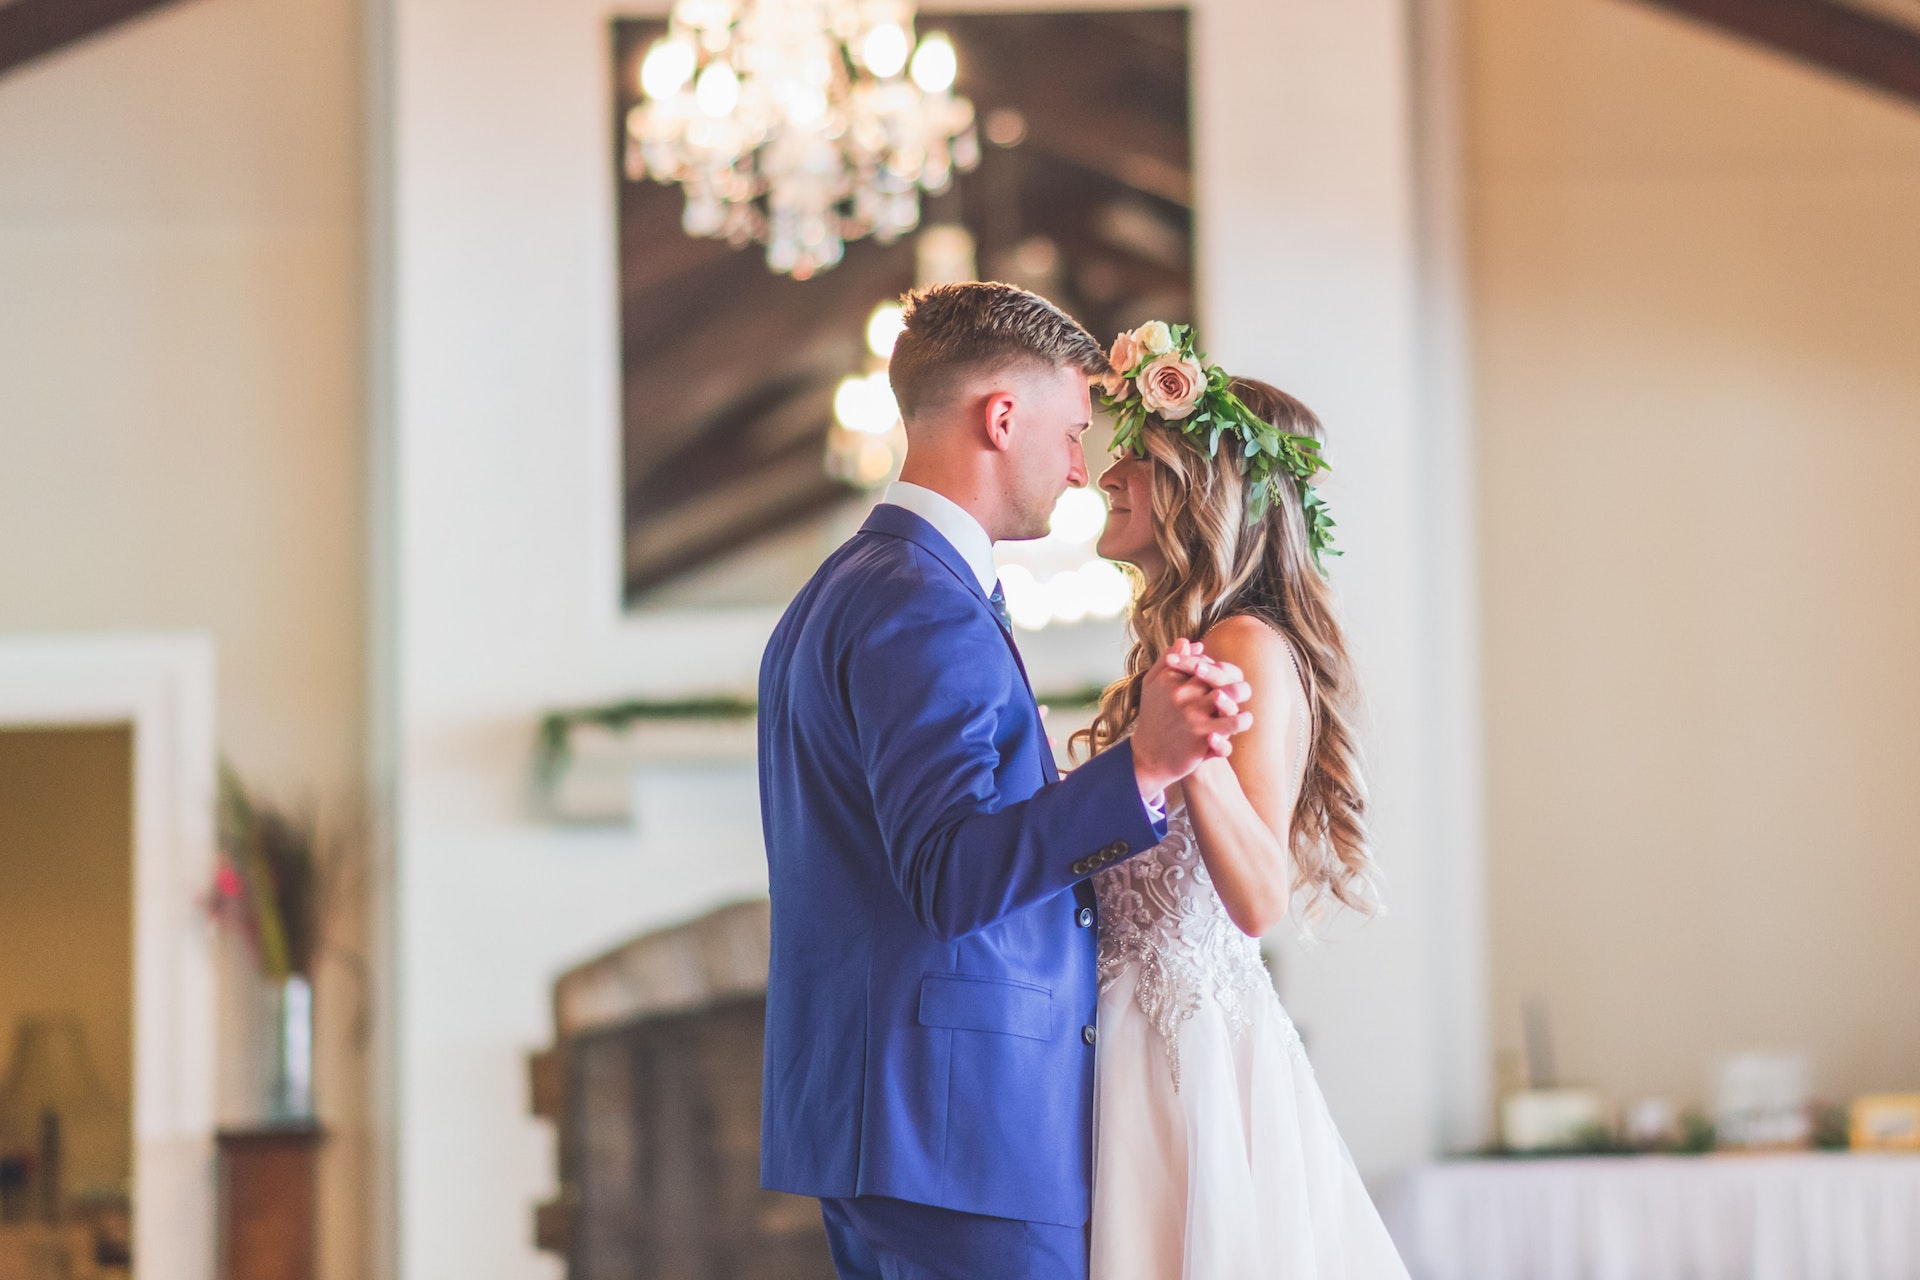 Tips on picking a song for your first dance